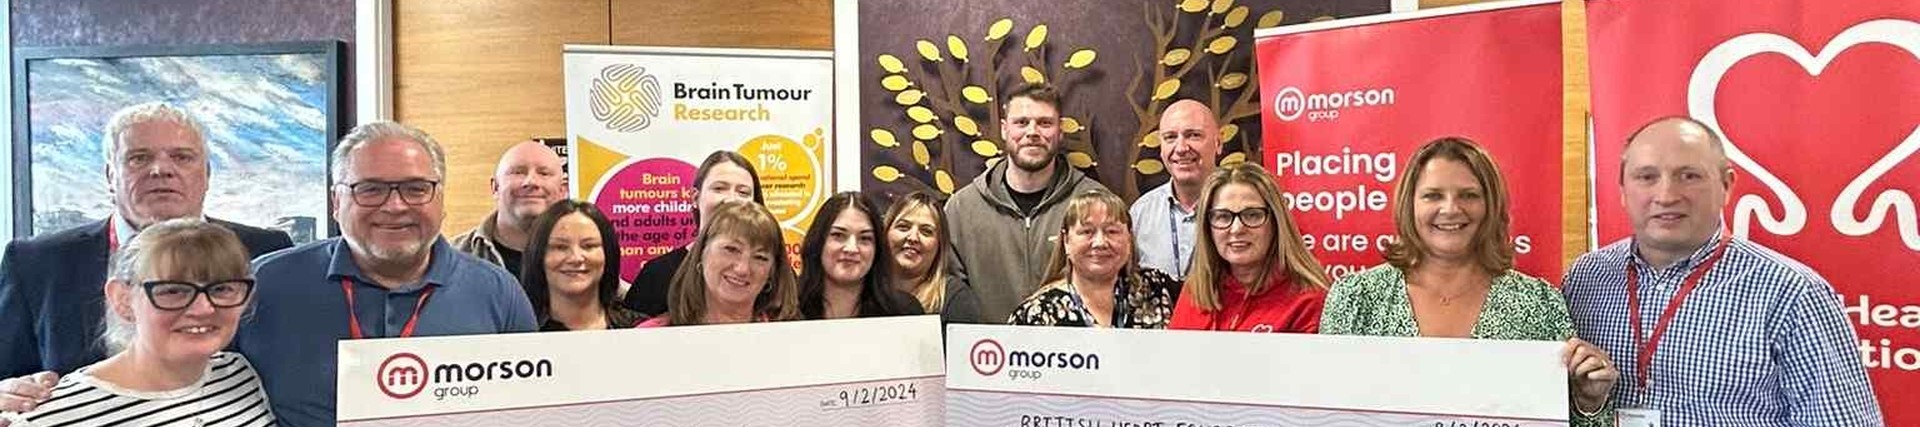 Morson Group Celebrates Record-Breaking Donation to British Heart Foundation and Brain Tumour Research